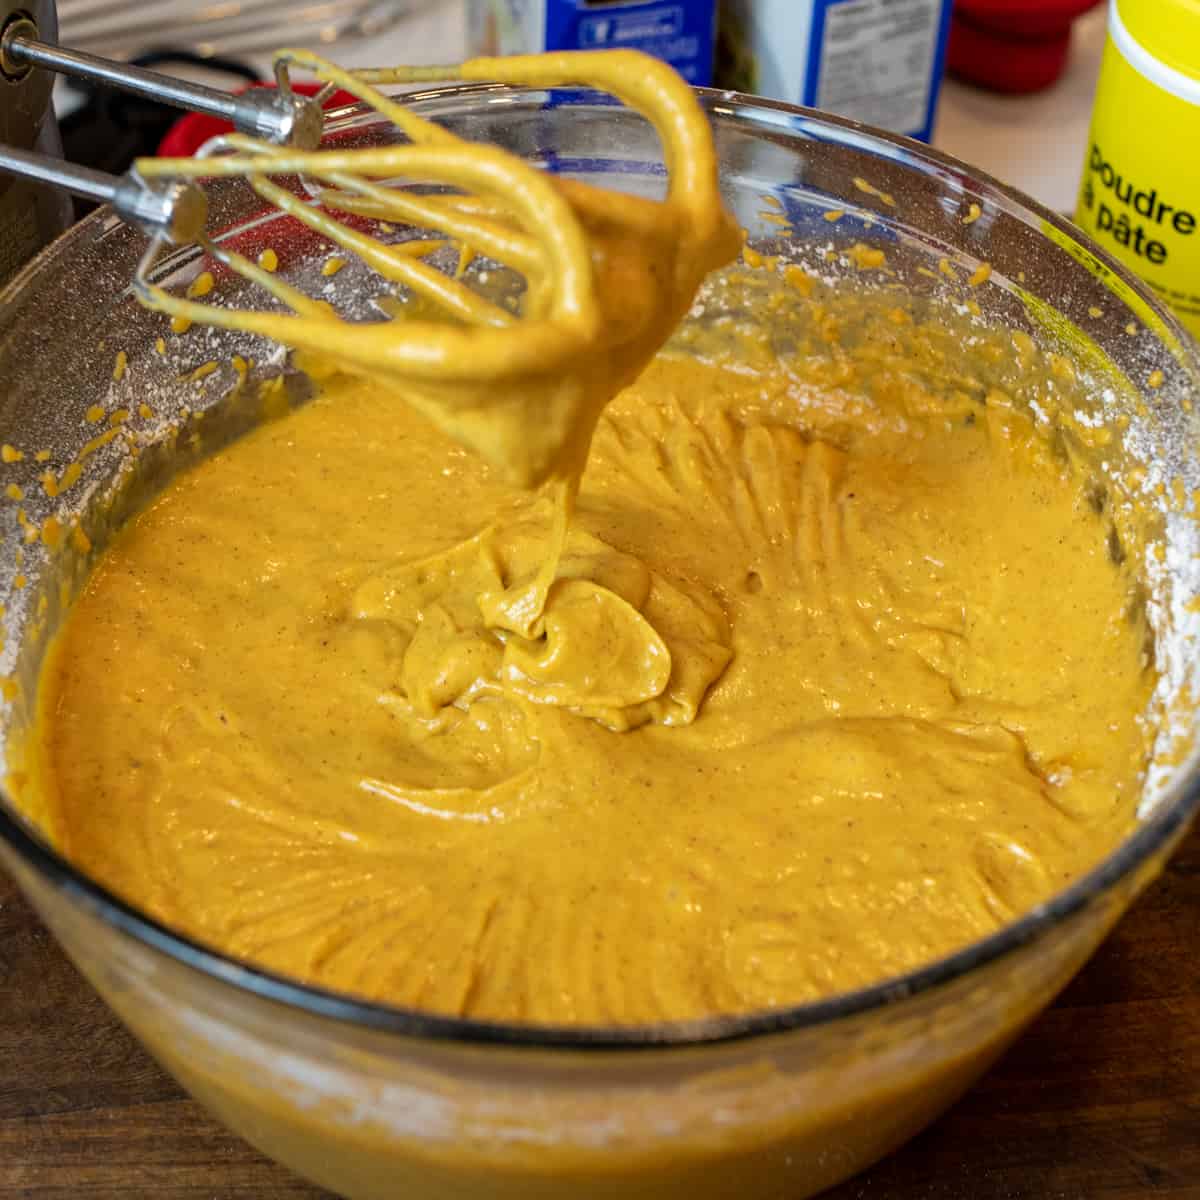 Pumpkin loaf batter mixed and ready to pour into loaf pans.